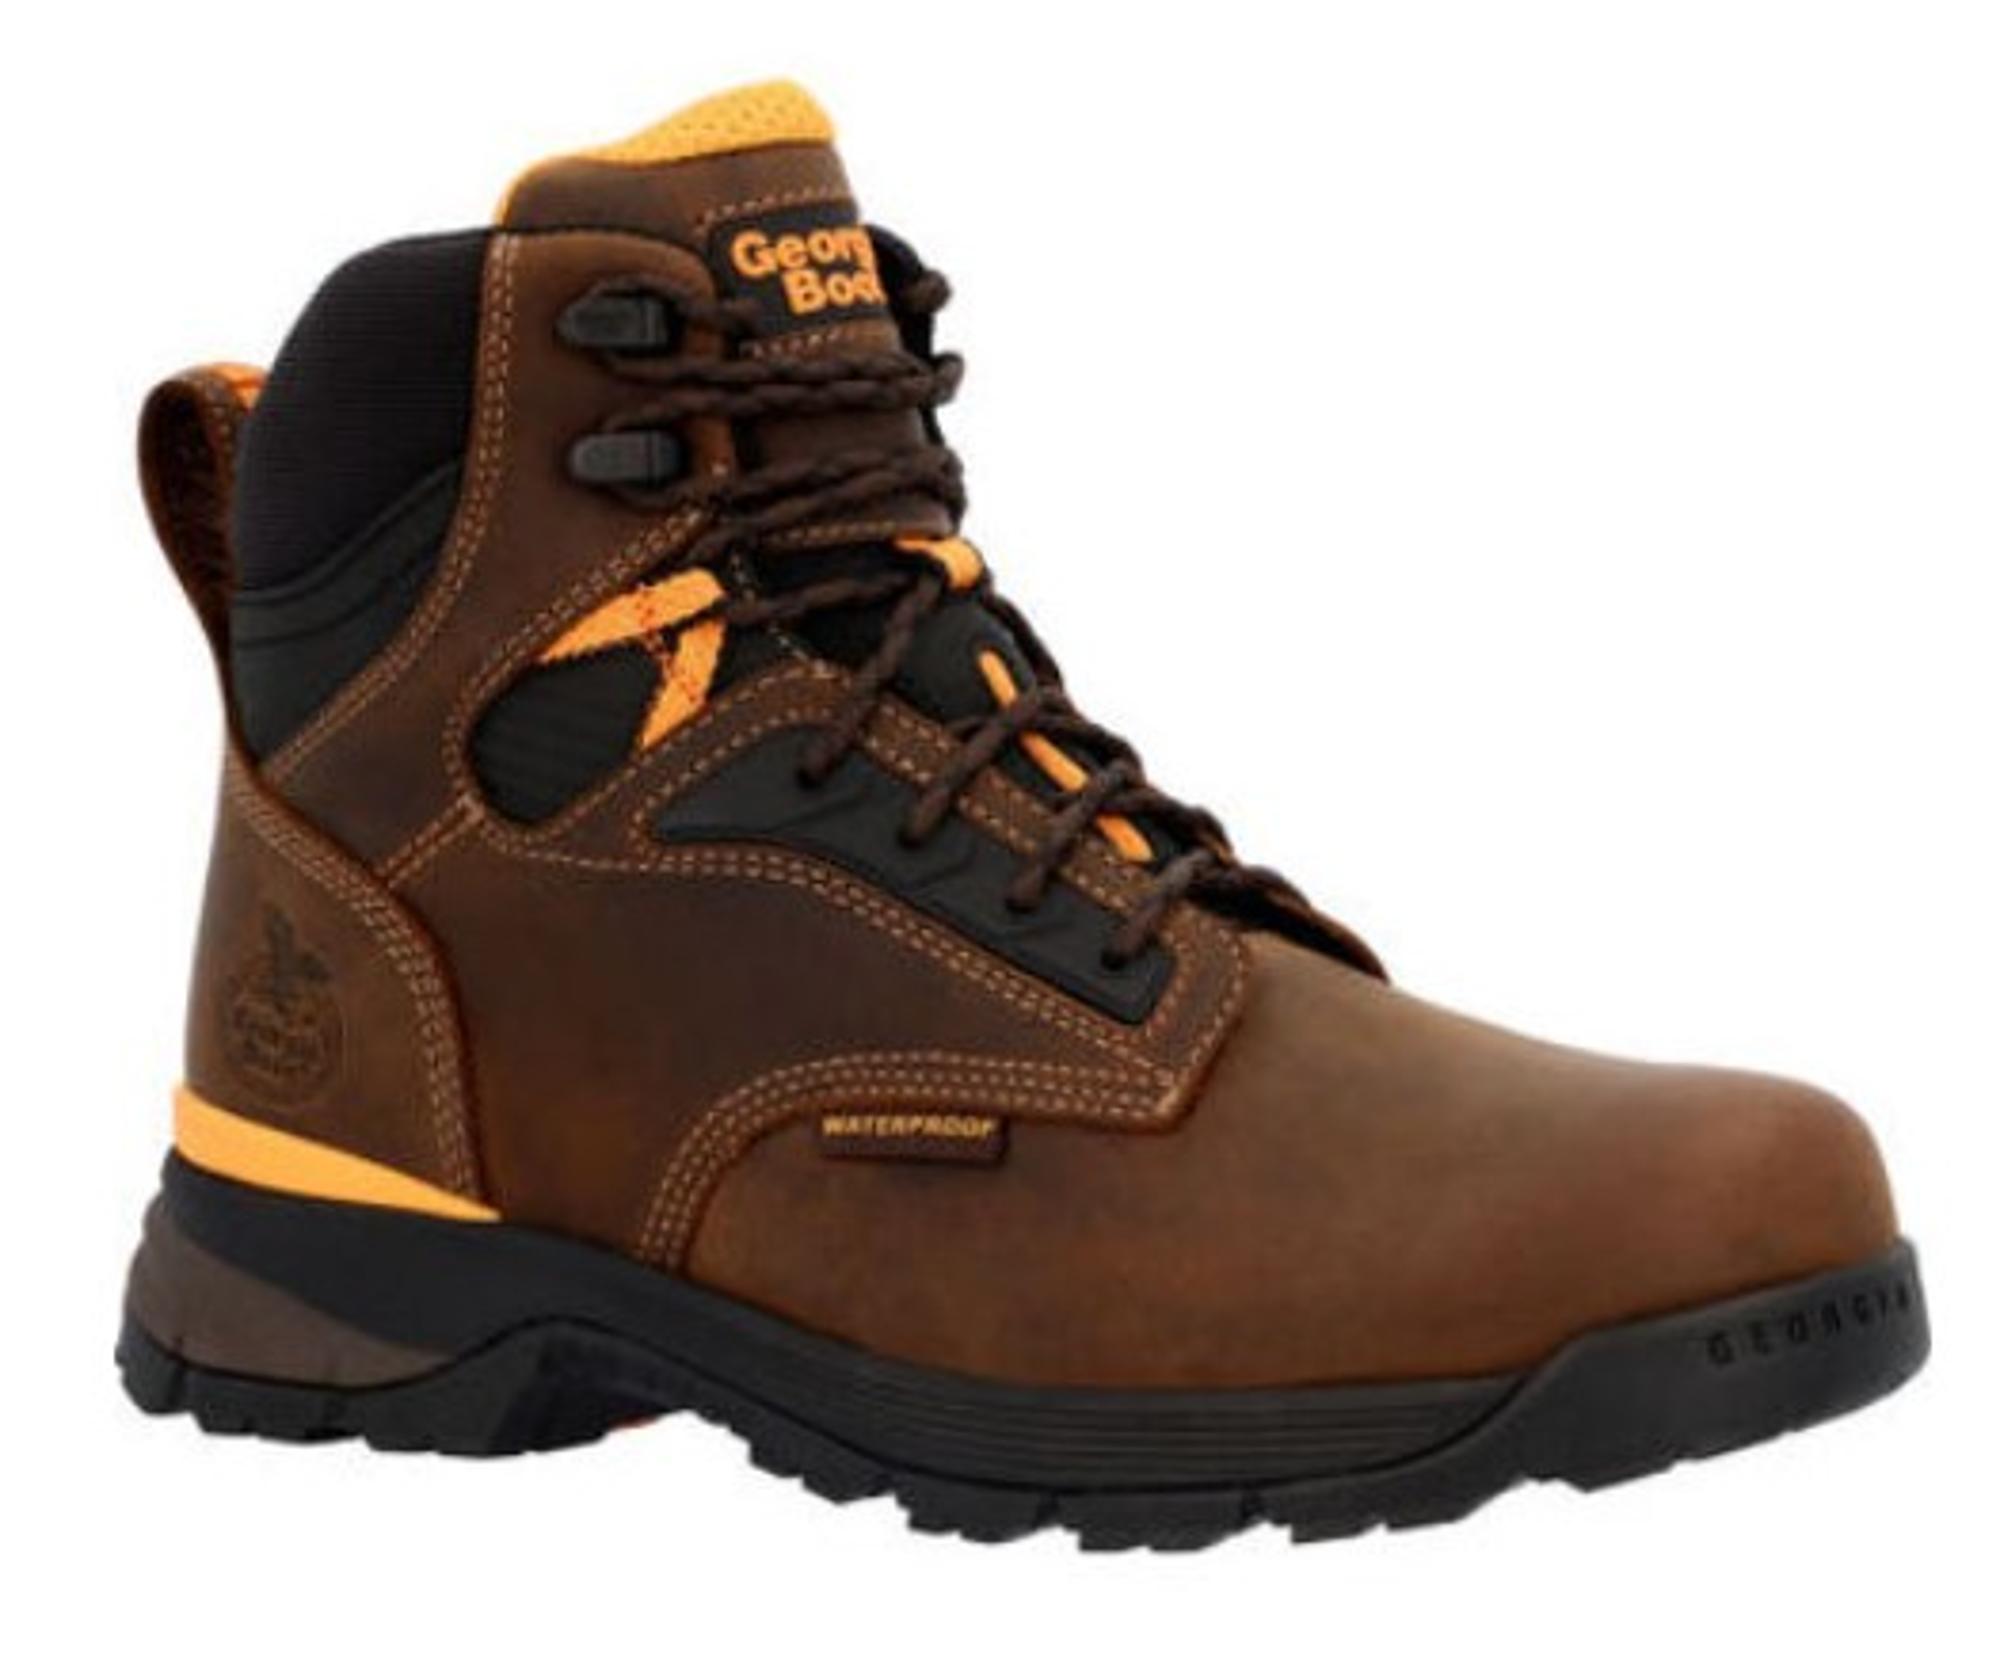 Tbd Waterproof Lace Up Work Boots